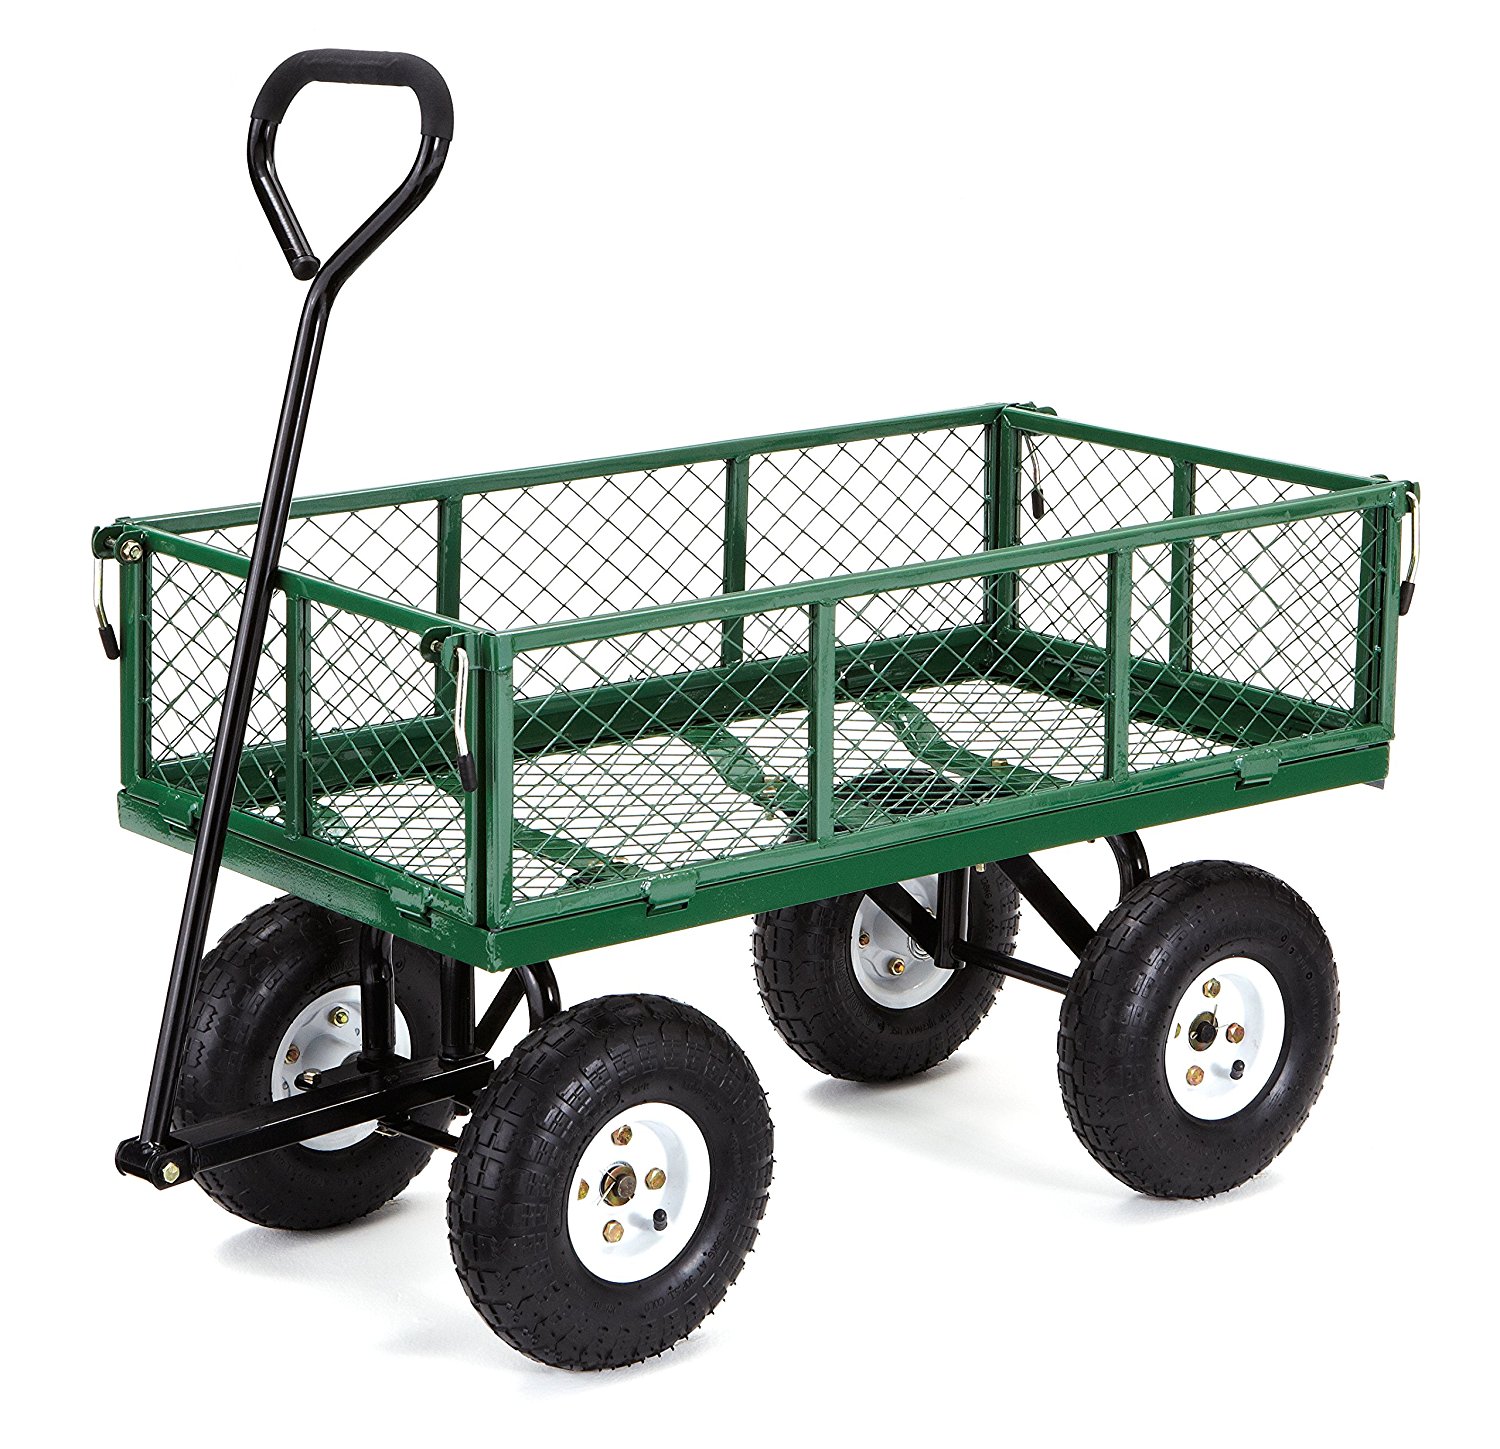 gorilla carts steel garden cart with removable sides with a capacity of 400  lb, green OEFIGFZ